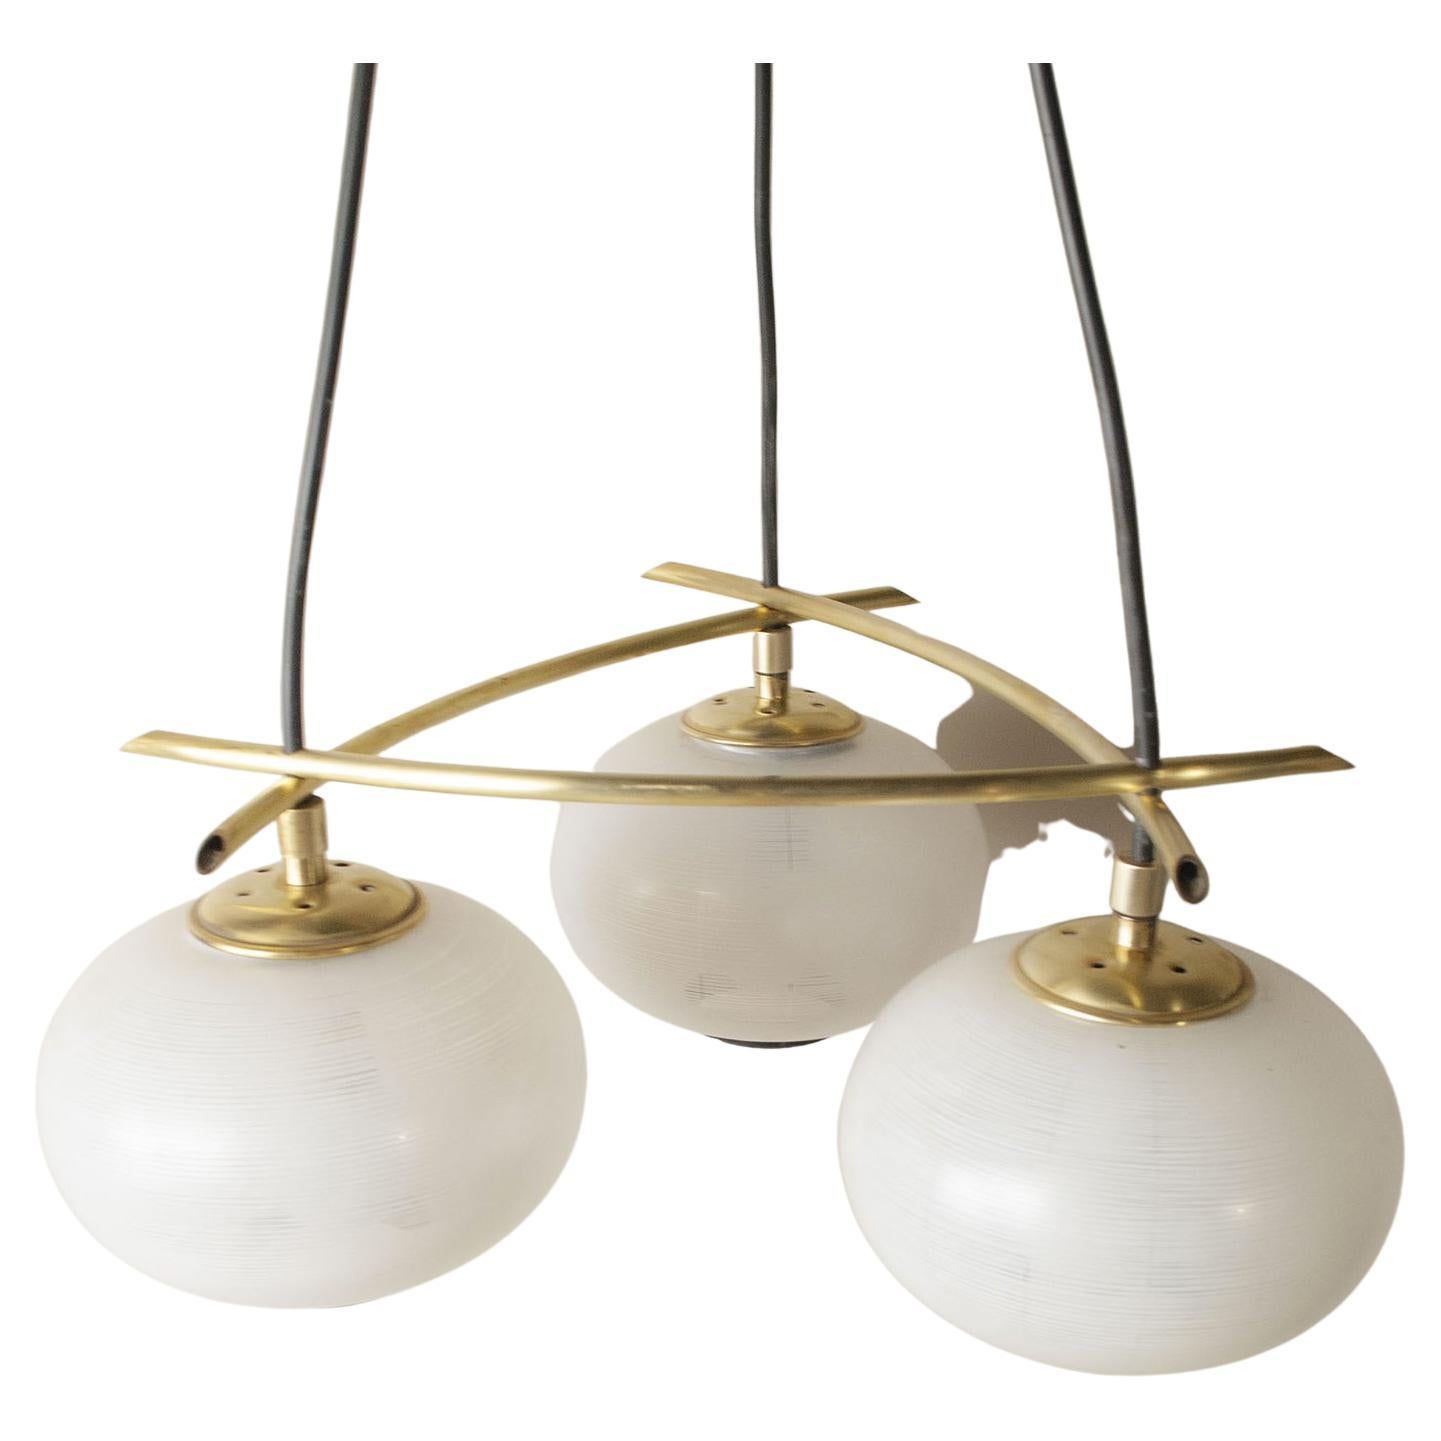 Pendant chandelier composed of three illuminating parts with frosted glass spheres brass structure Italian production 1950s.